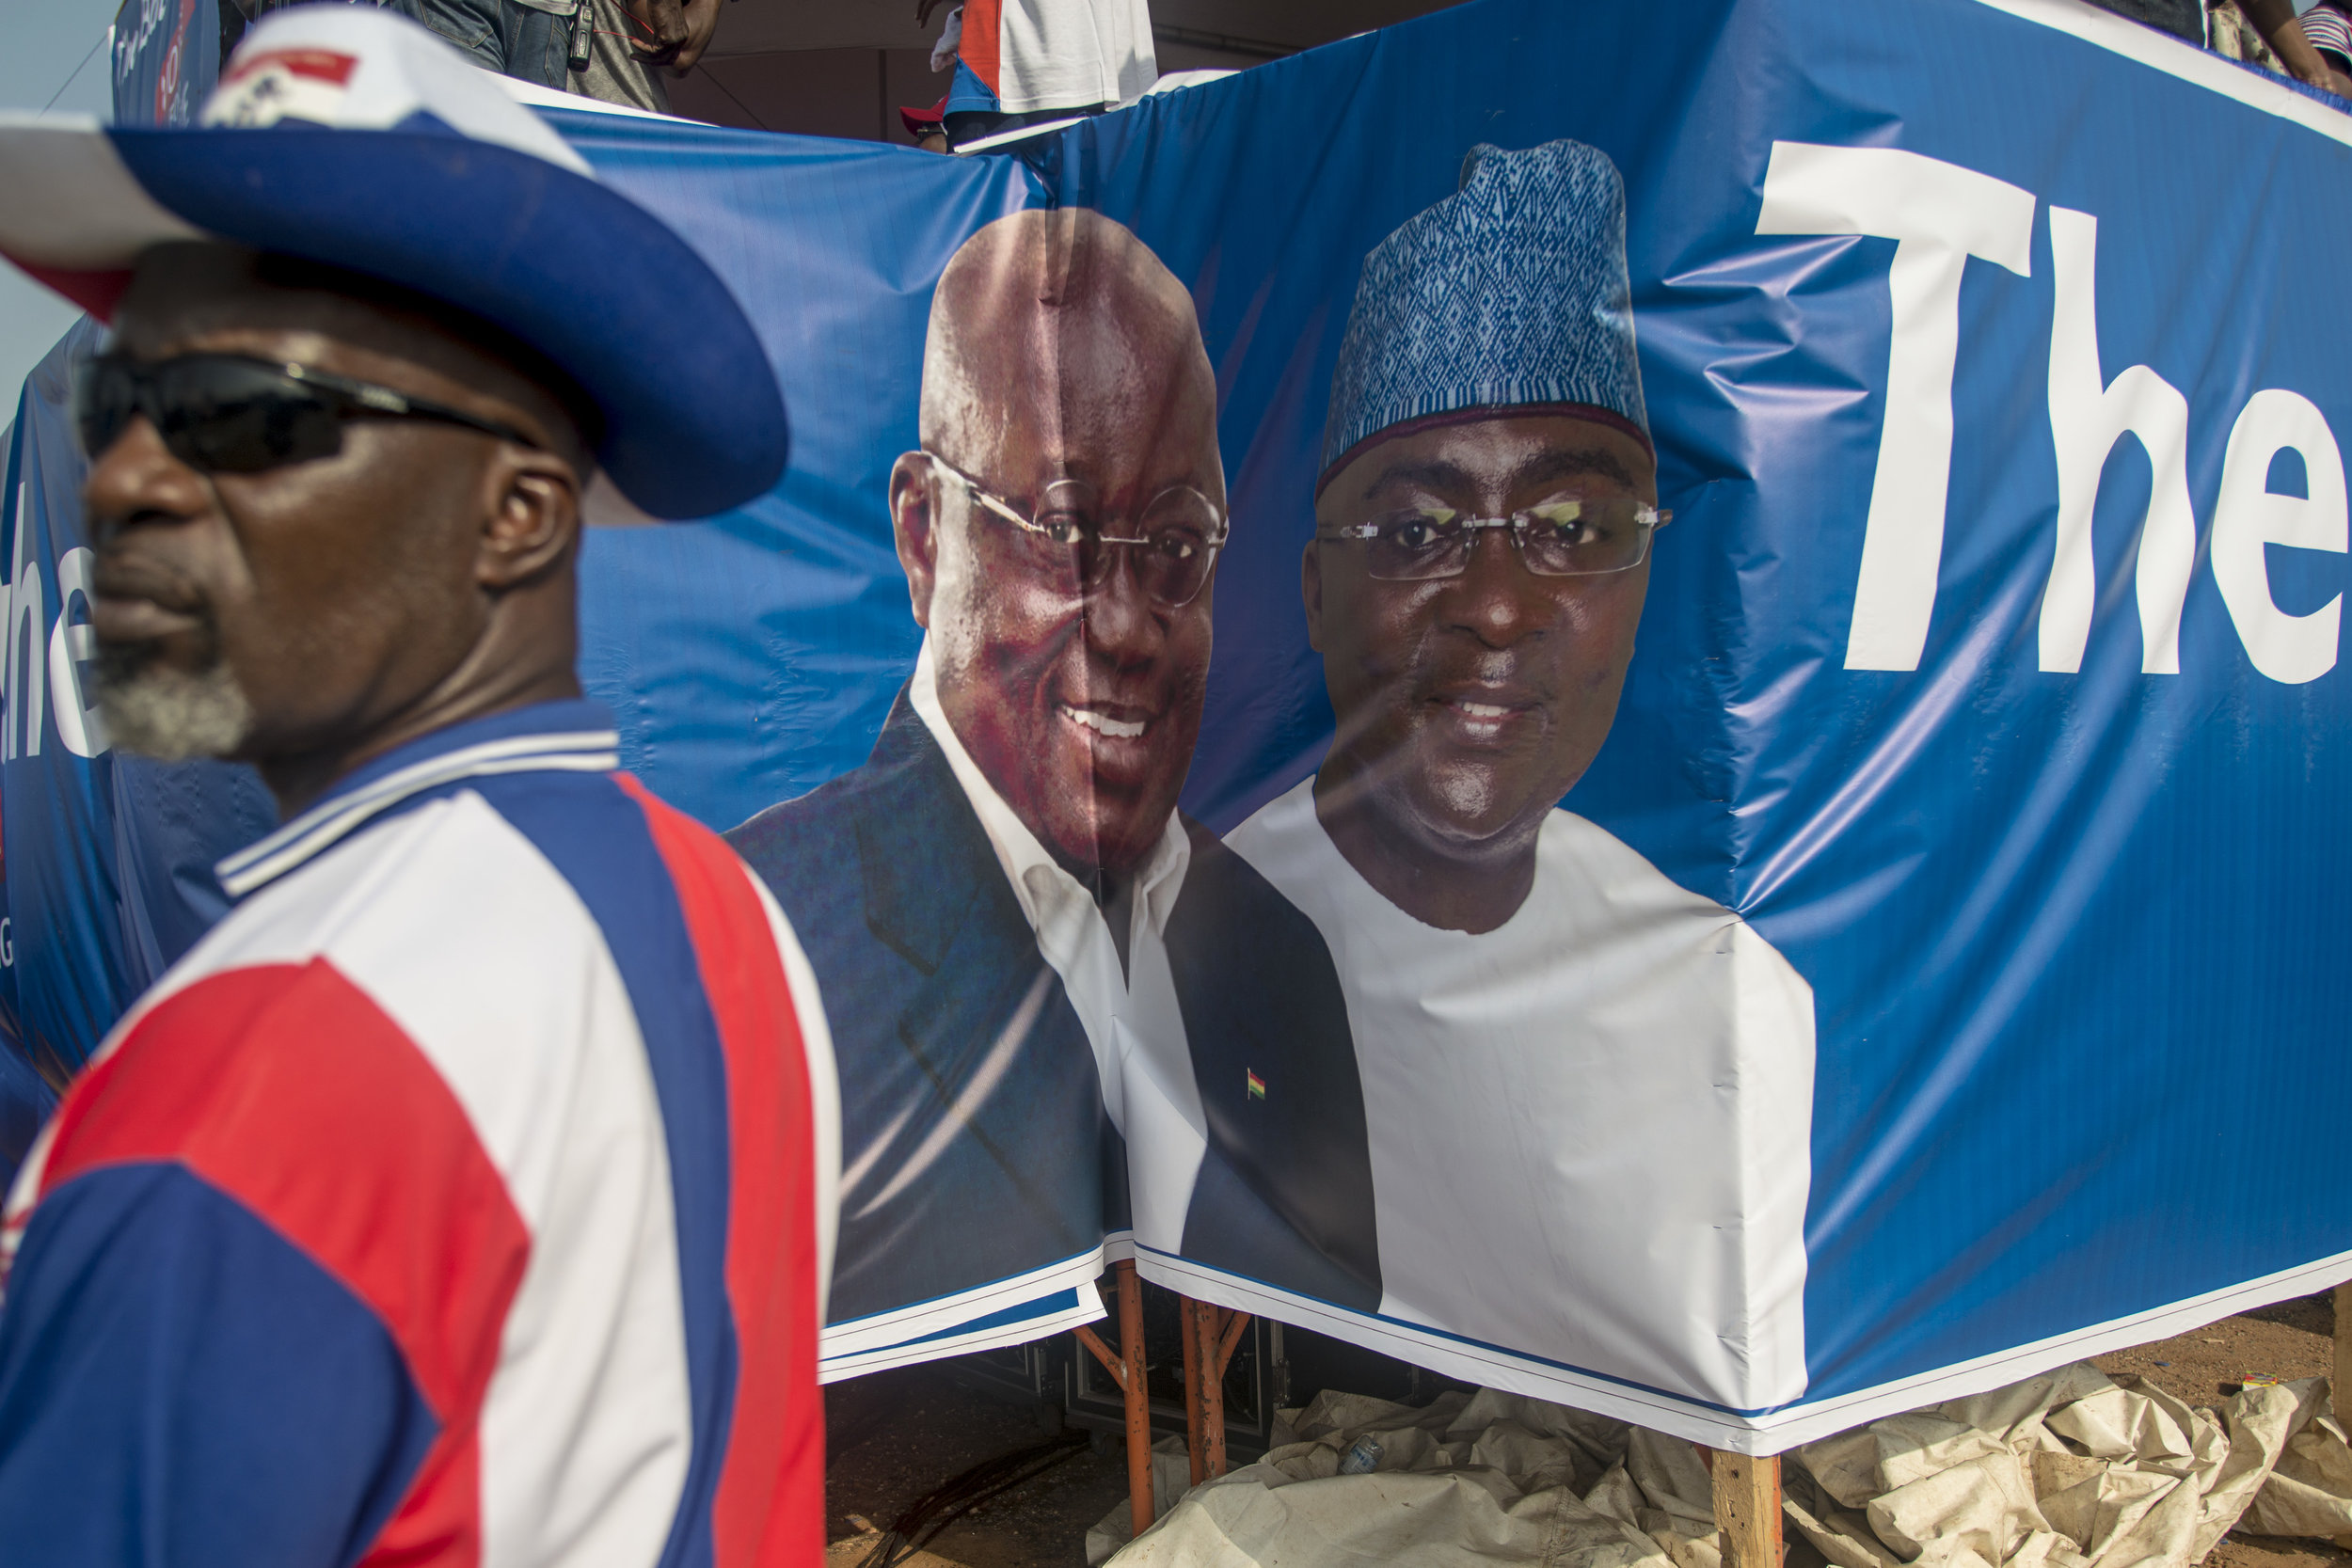  A banner of &nbsp;Nana Akufo-Addo and Mahamudu Bawumia of NPP in Accra. Main candidate and vice-president candidate for the December 7th General Ghanaian Election 